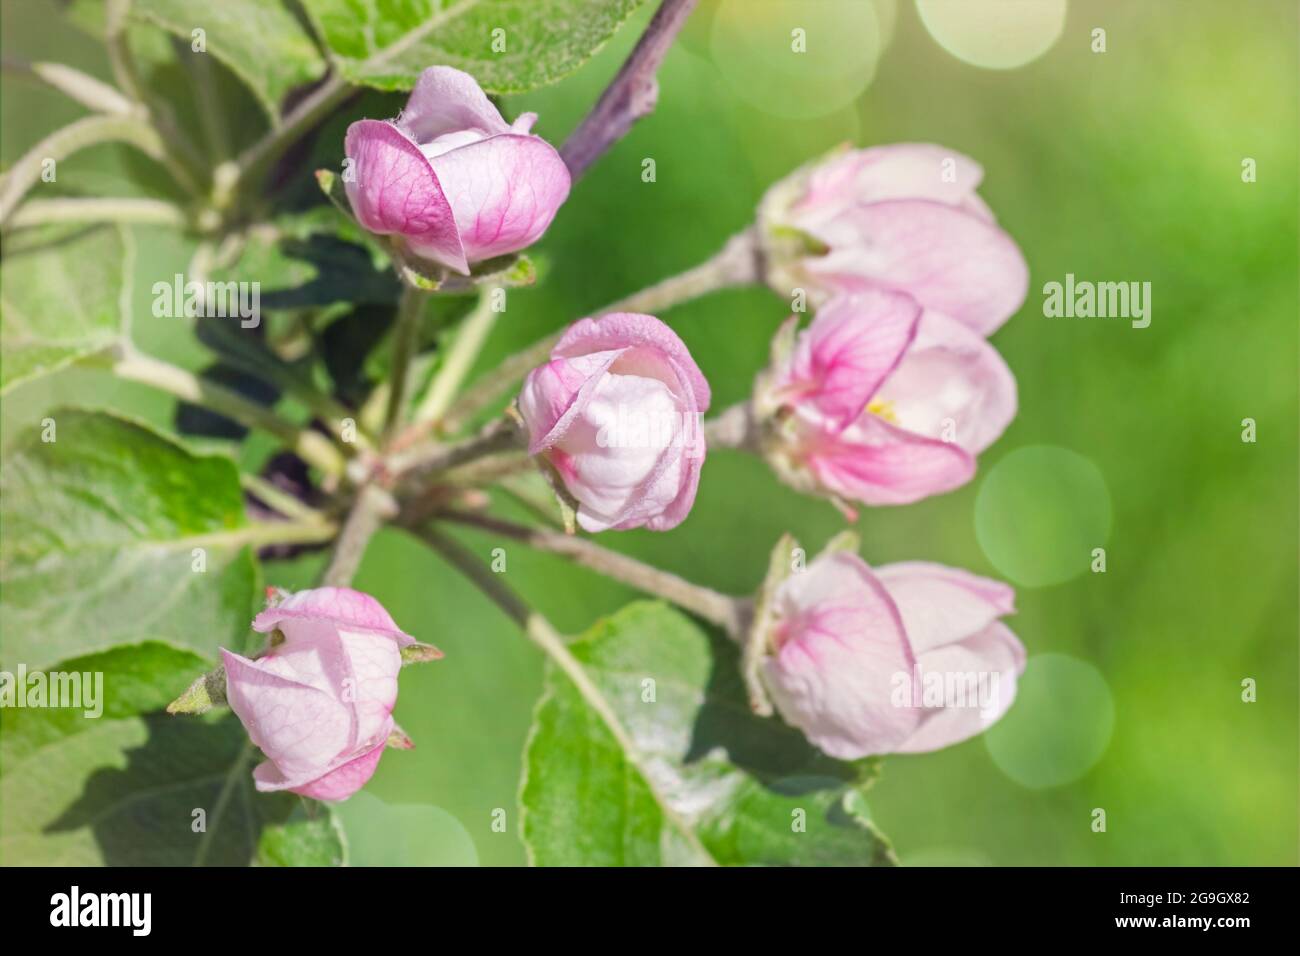 Real pretty pink buds of apple flowers on happy green leaves background Stock Photo